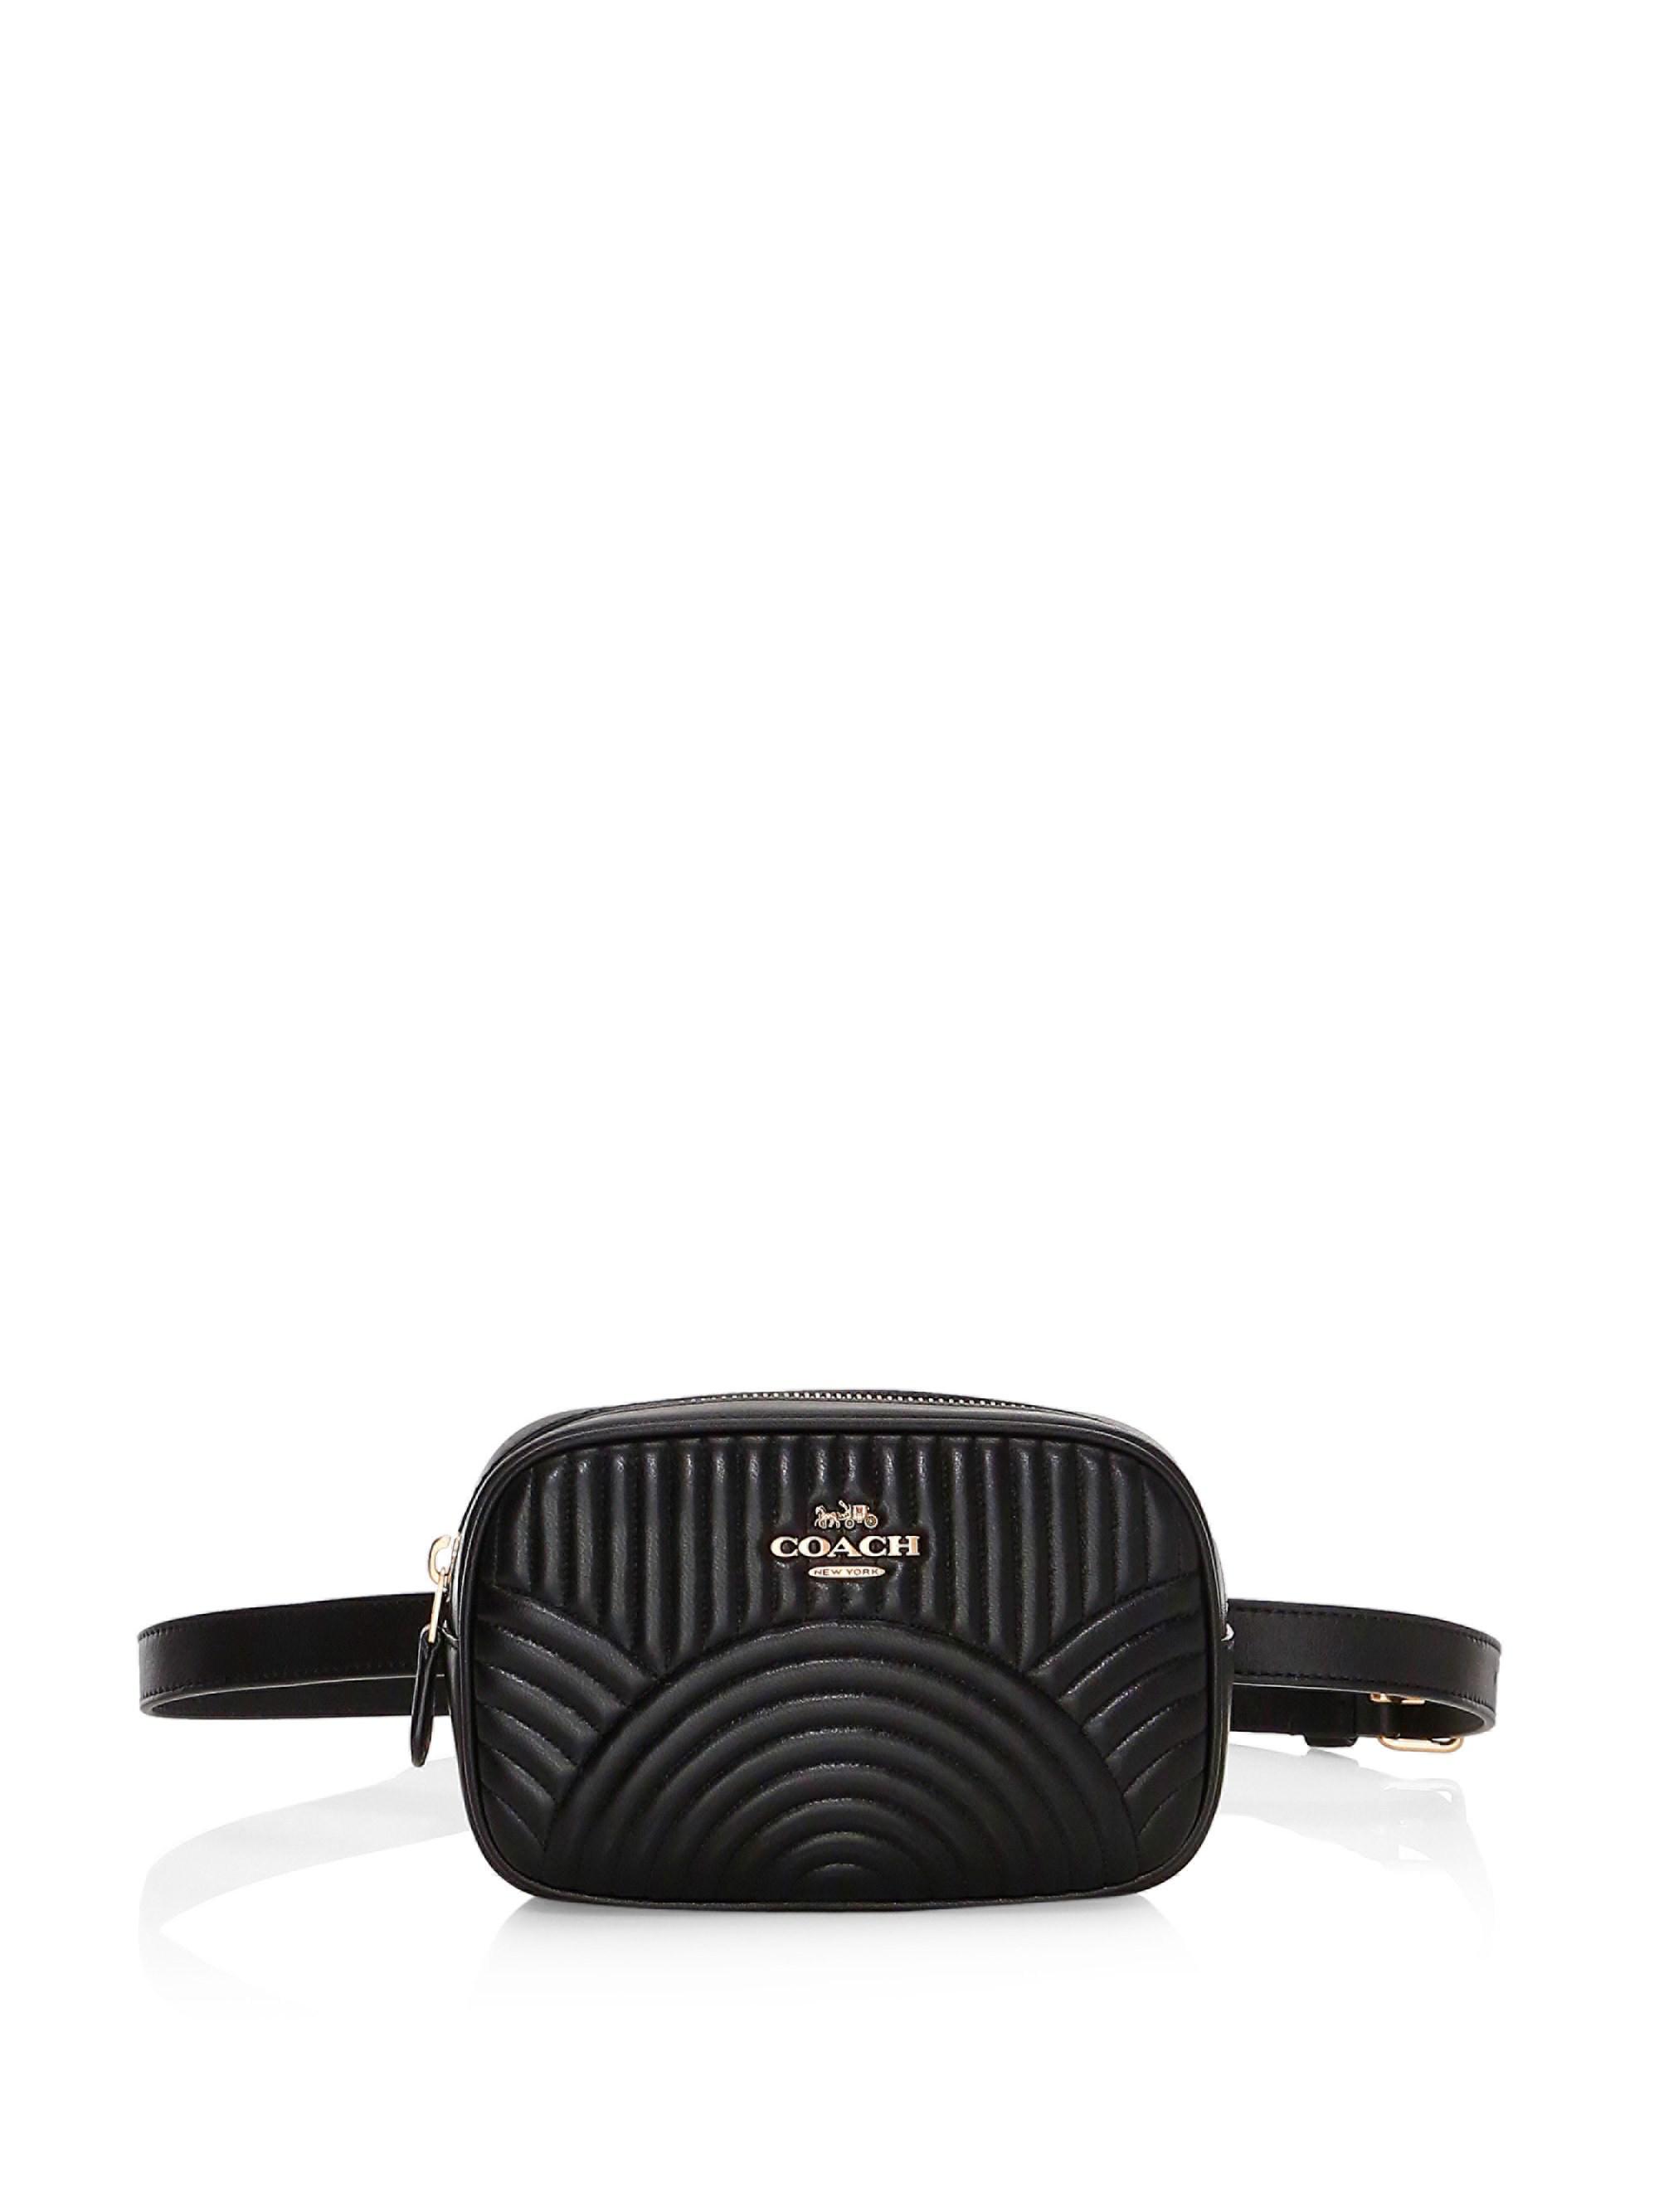 COACH Quilted Leather Belt Bag in Black - Lyst